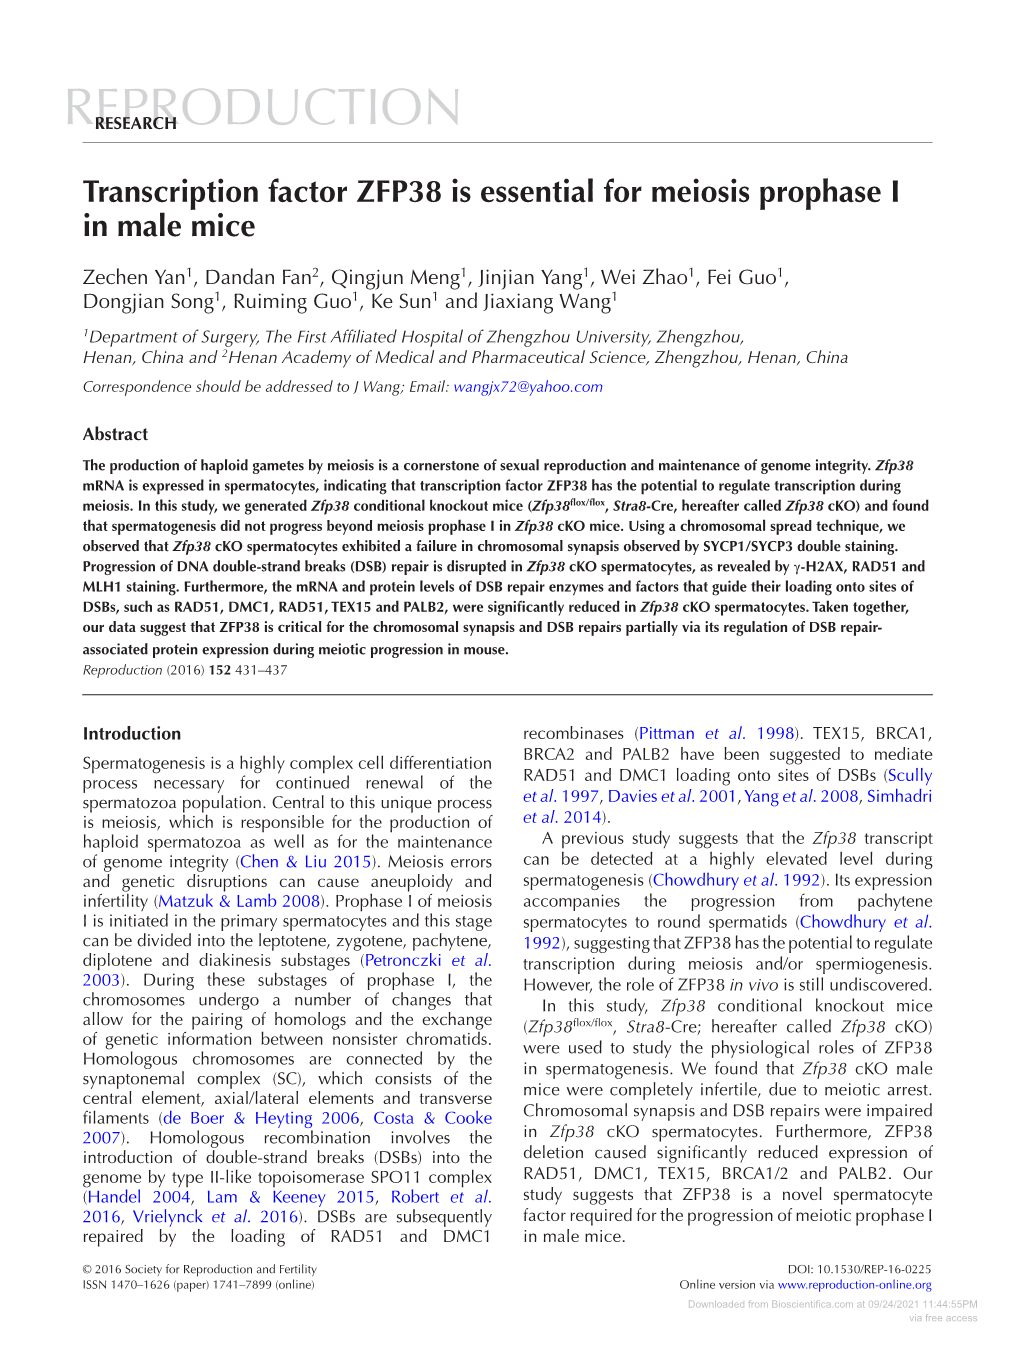 Transcription Factor ZFP38 Is Essential for Meiosis Prophase I in Male Mice